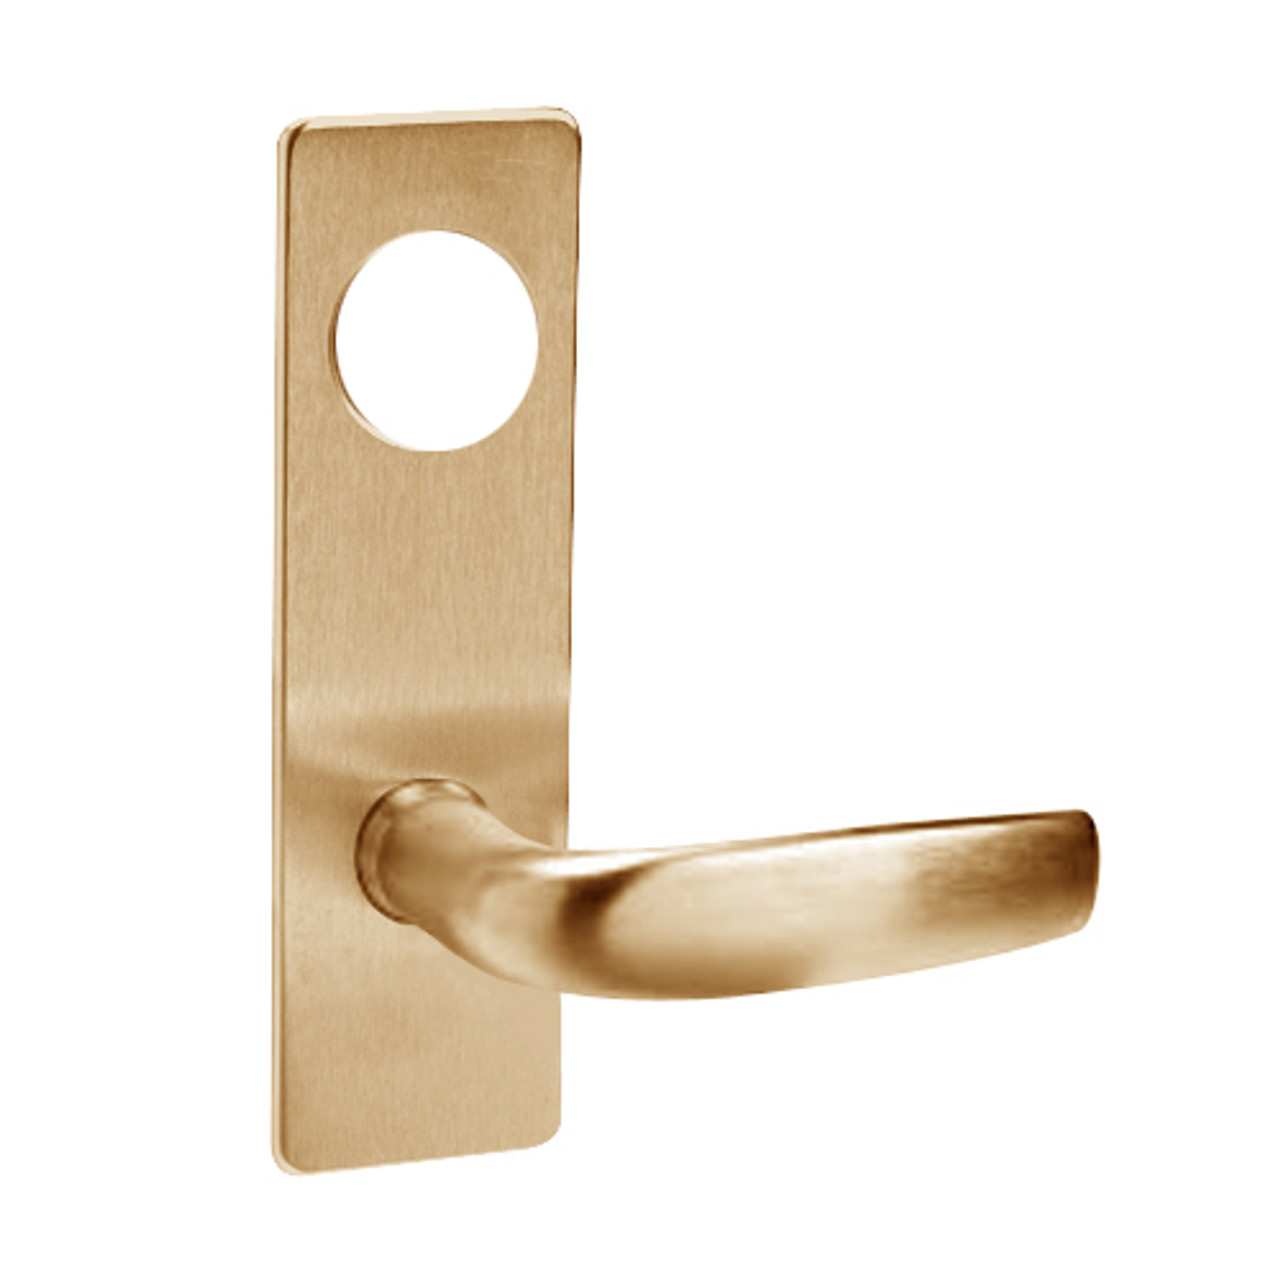 ML2024-CSR-612-CL6 Corbin Russwin ML2000 Series IC 6-Pin Less Core Mortise Entrance Locksets with Citation Lever in Satin Bronze